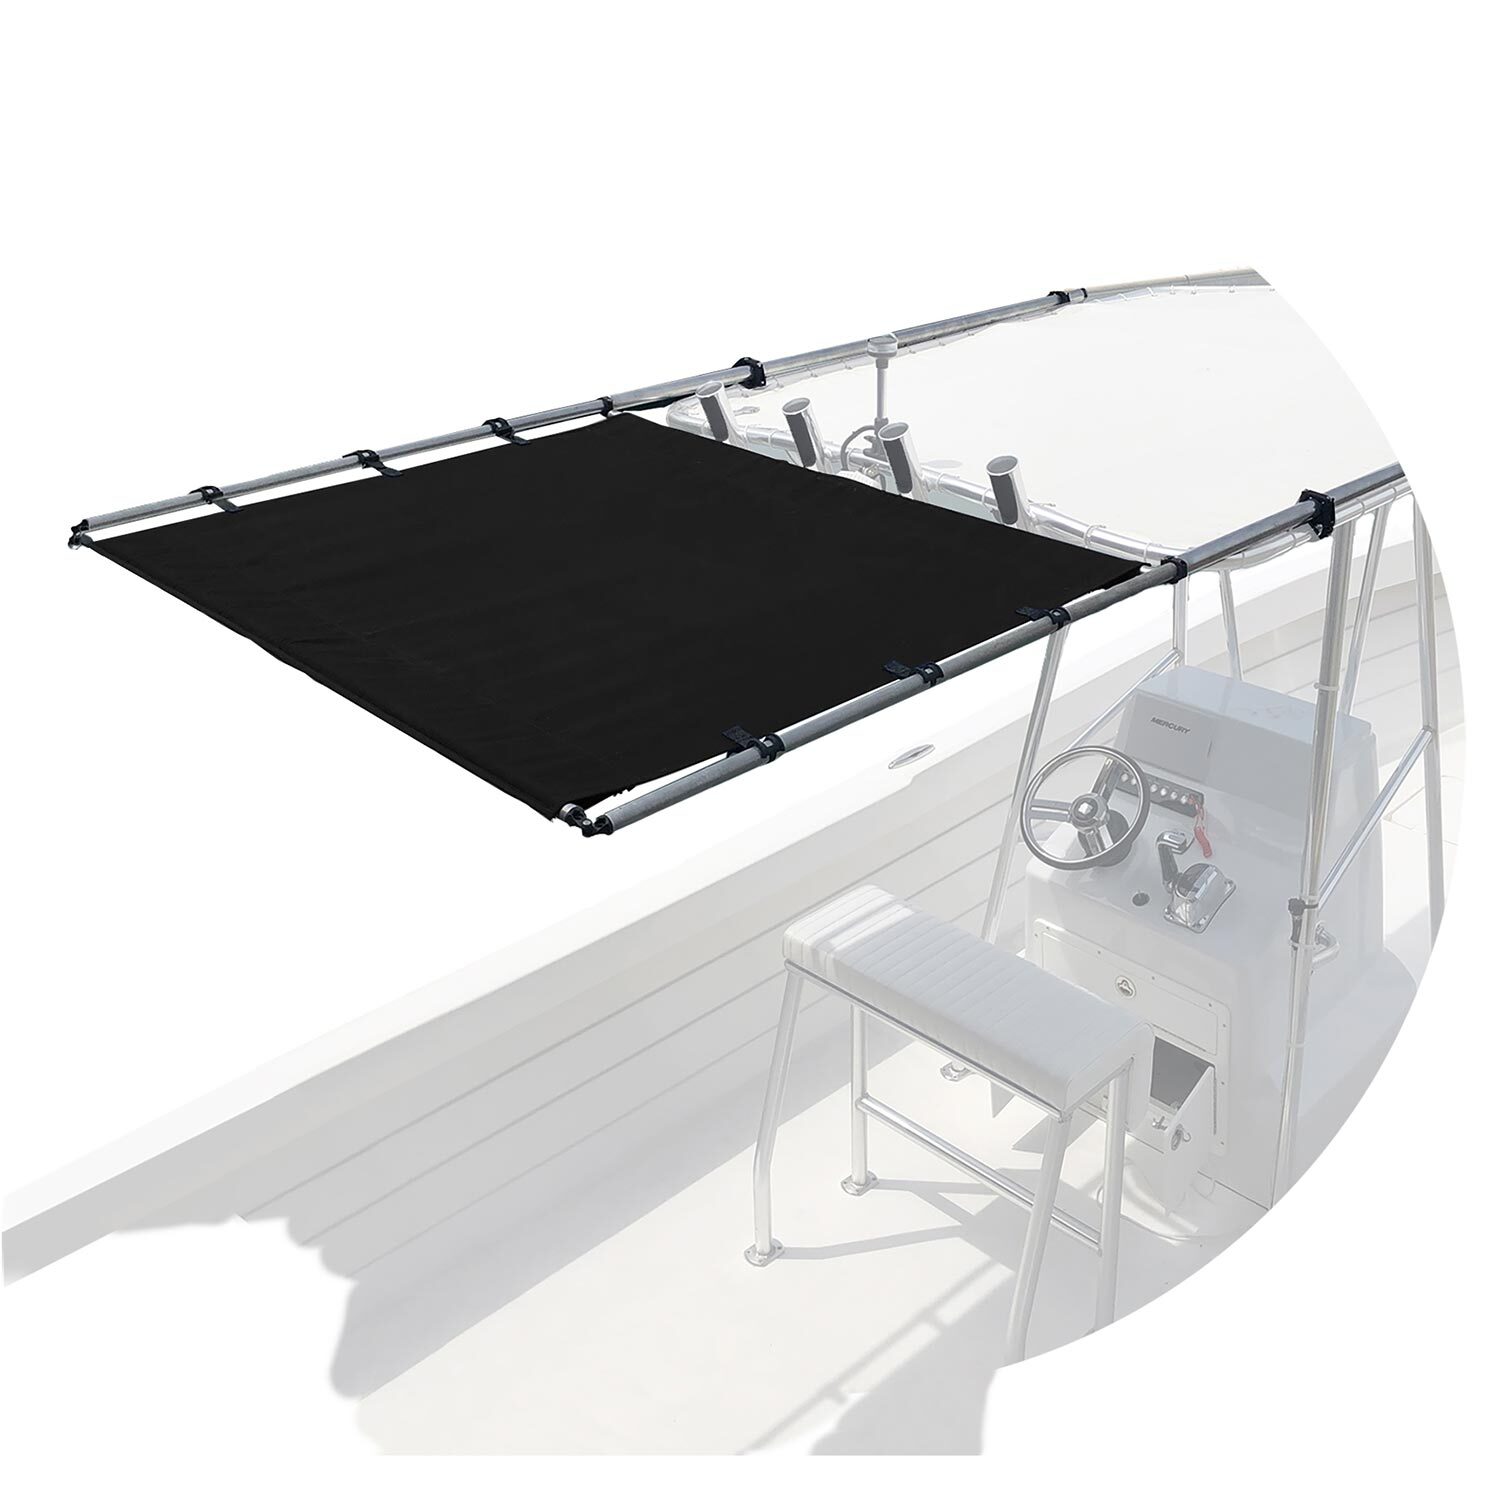 Boat Parts Accessories Taylor Made Lewmar SureShade, 51% OFF